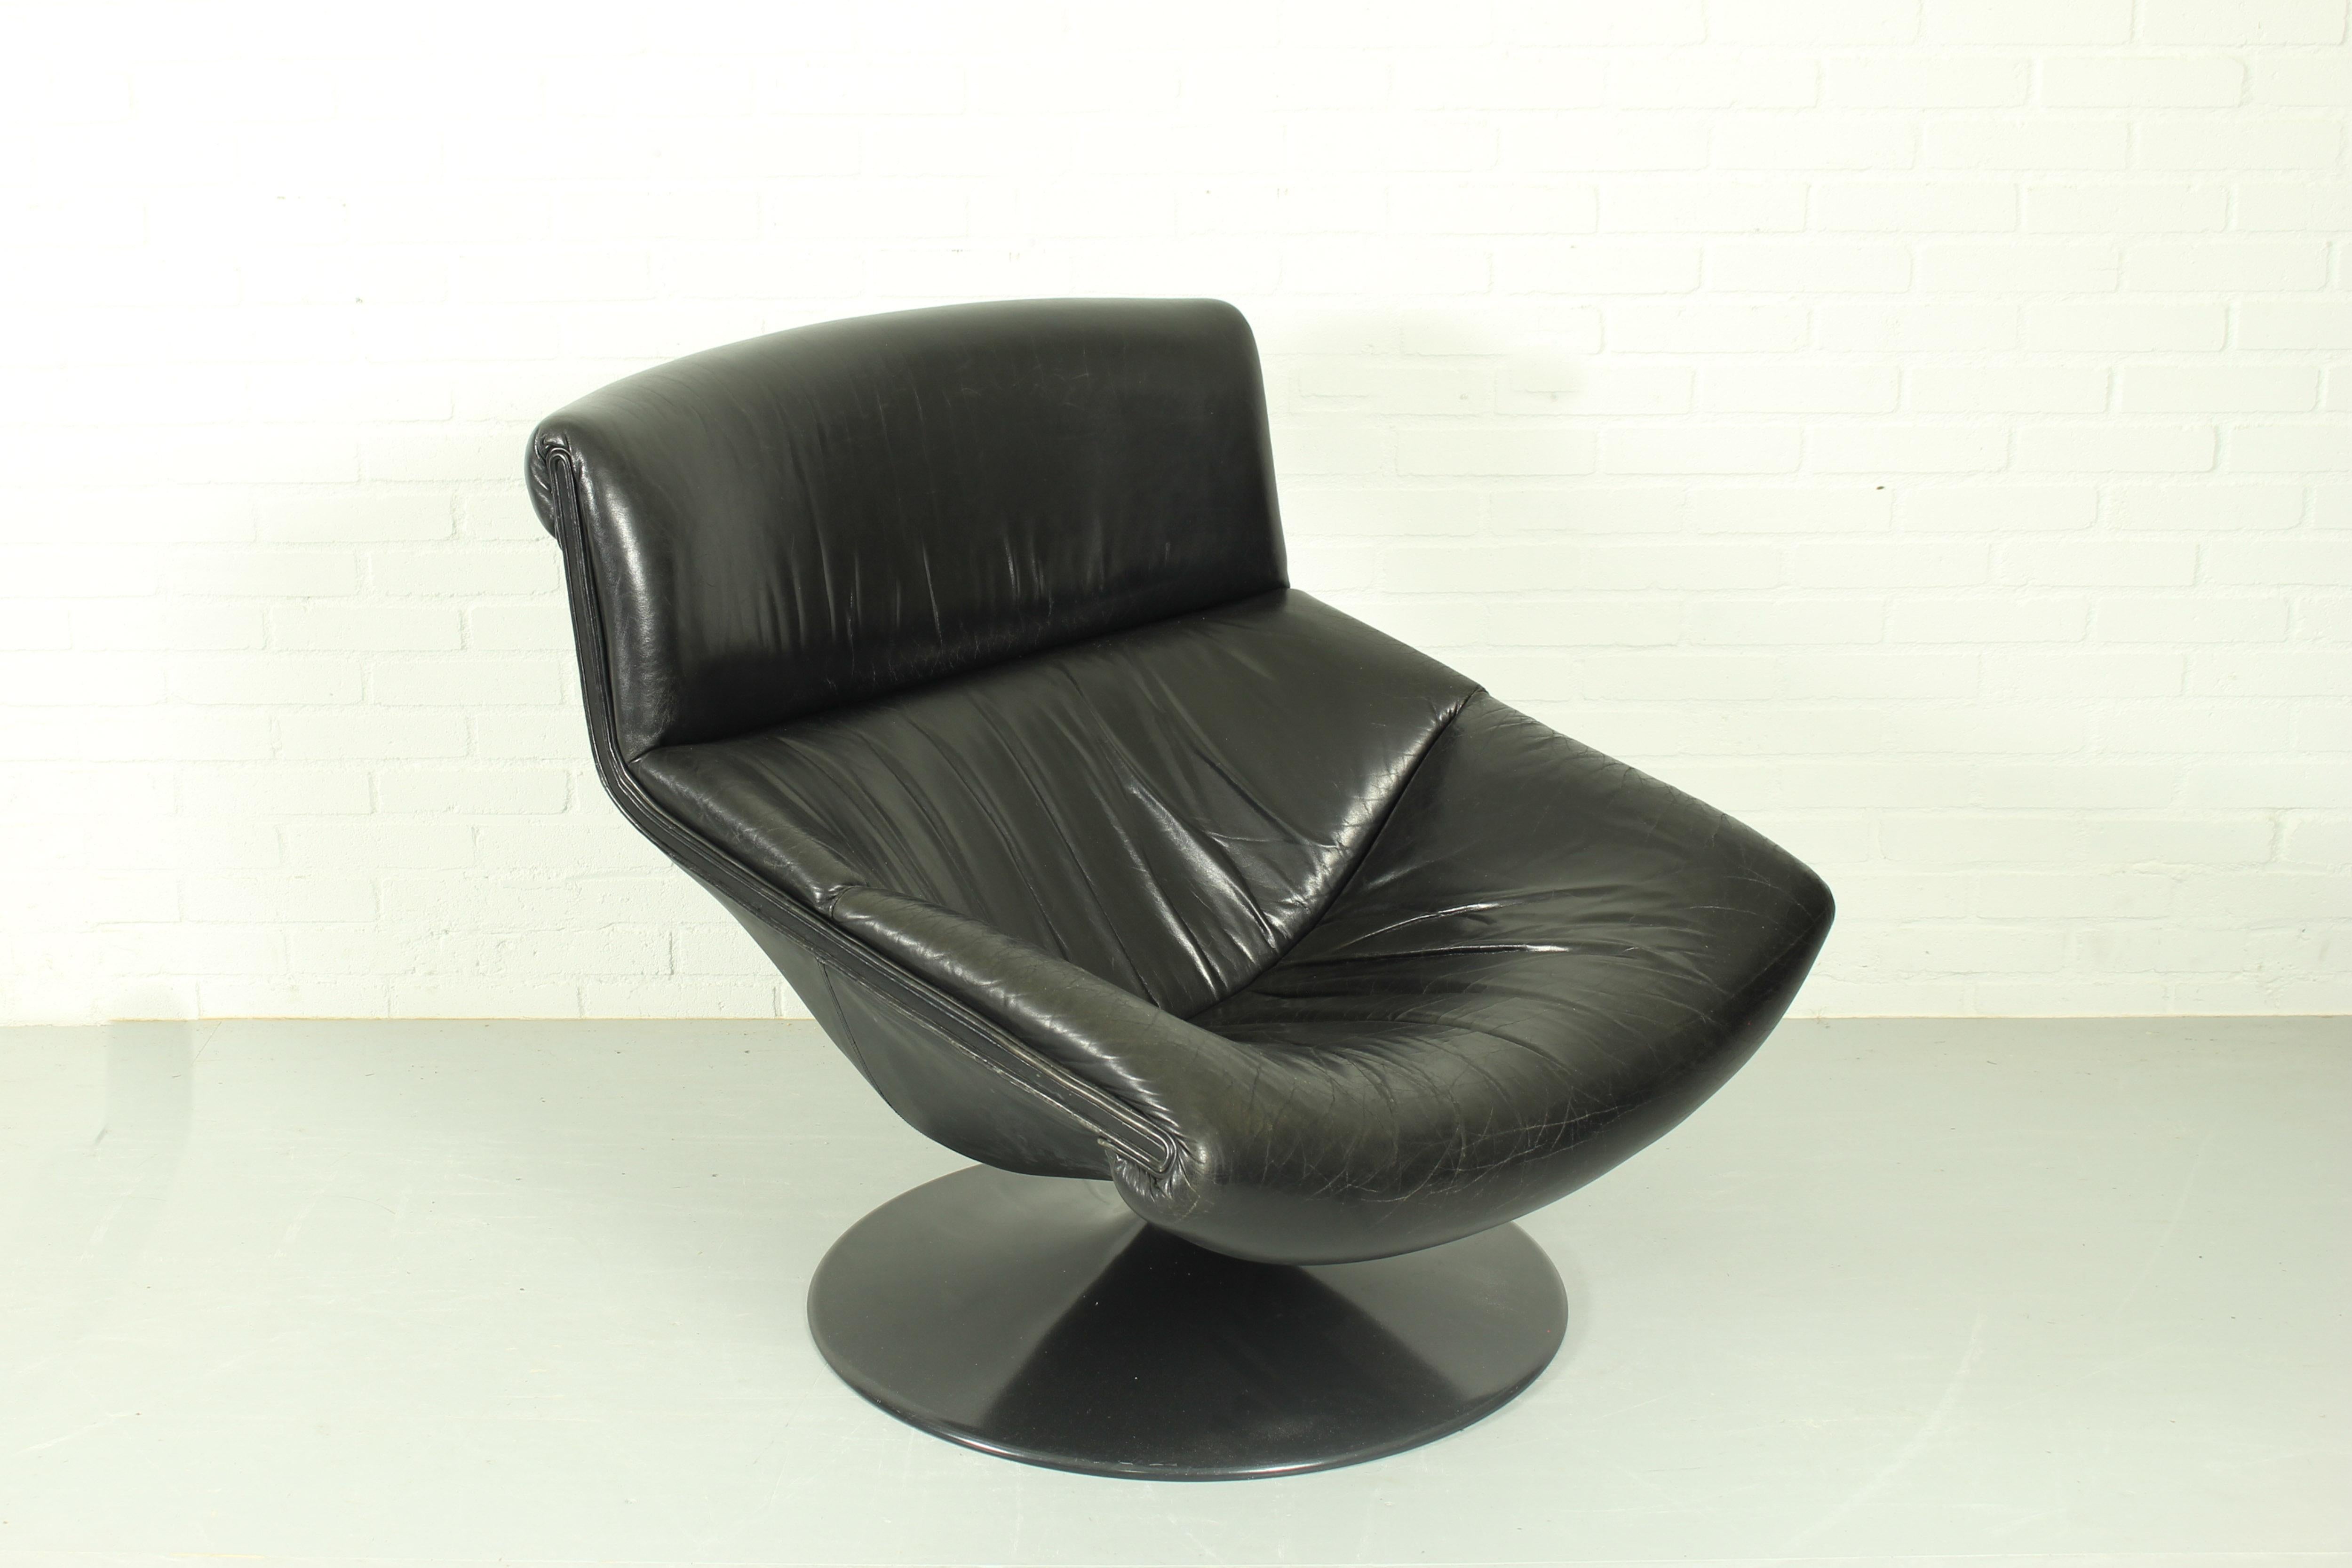 Lounge Swivel chair by Geoffrey Harcourt for Artifort, 1970s. Model F520. This chair has a metal round base and has original black leather. In a good vintage condition with heavy patina on the leather. 

Dimensions: 85cm h, 85cm w and 95cm d.
